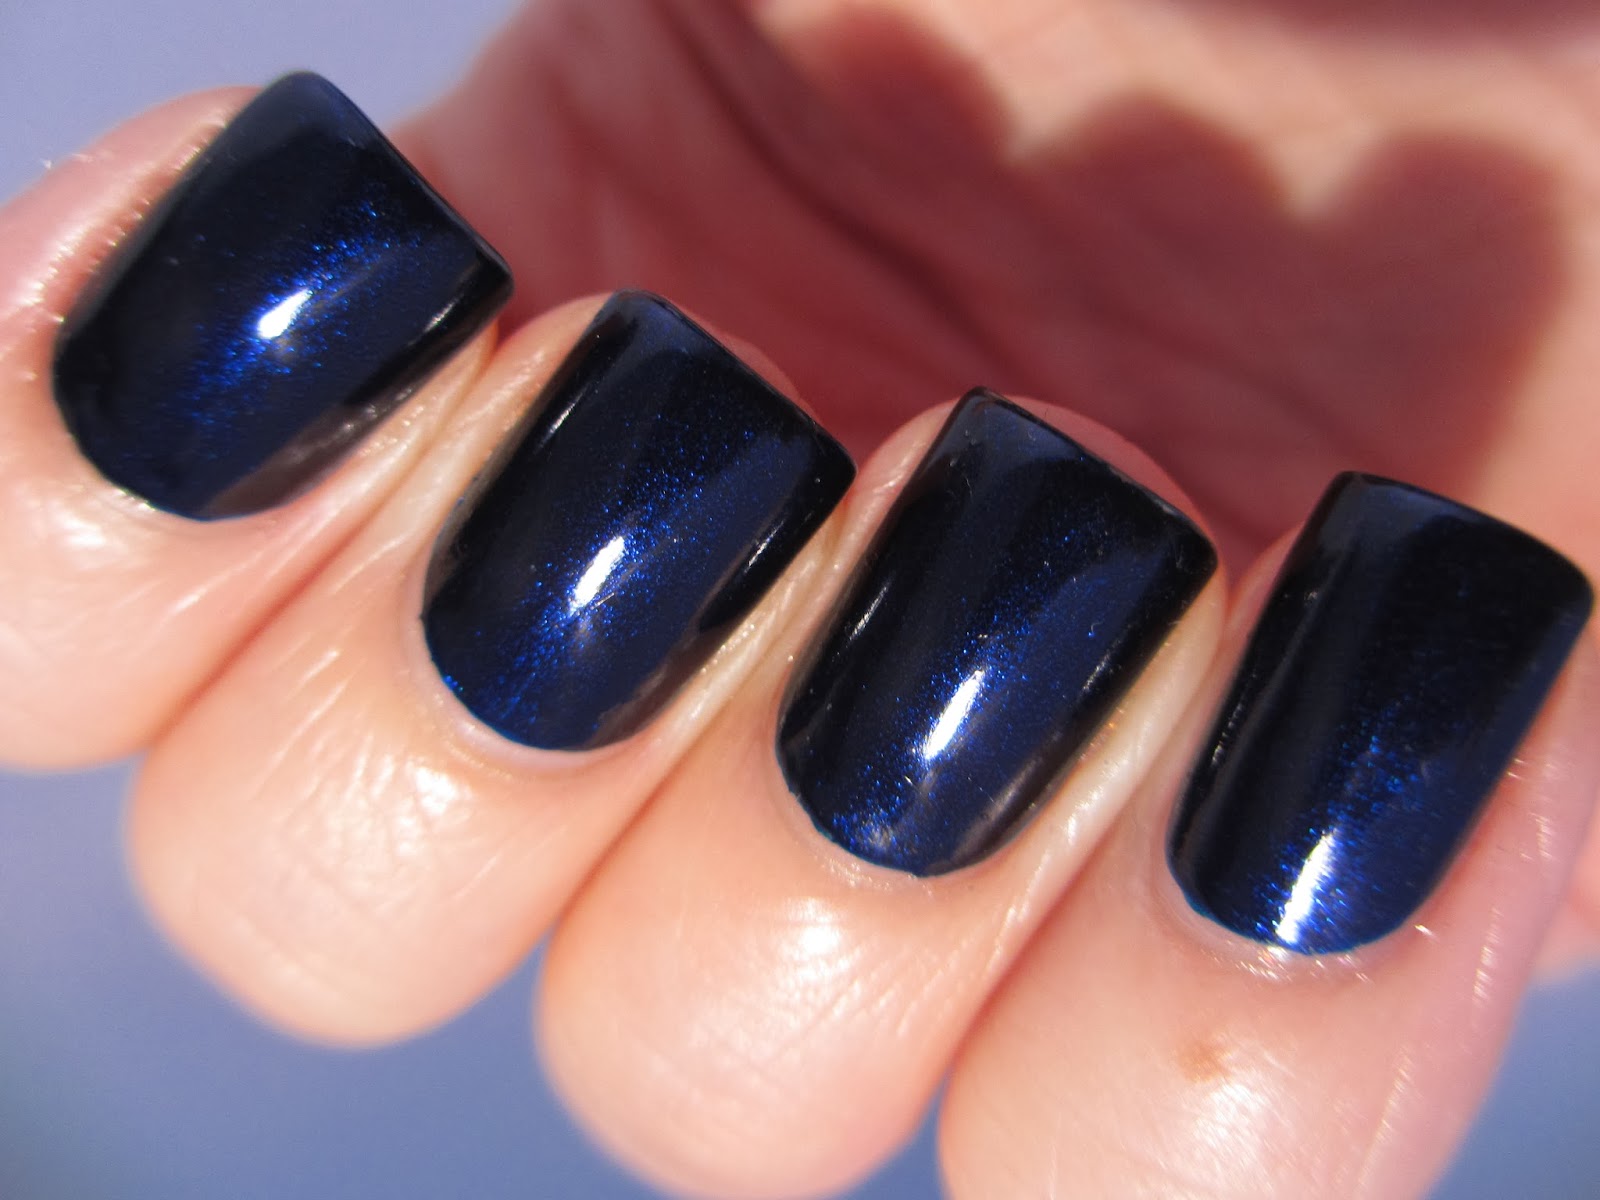 Orly Nail Lacquer in "Navy Yard" - wide 4